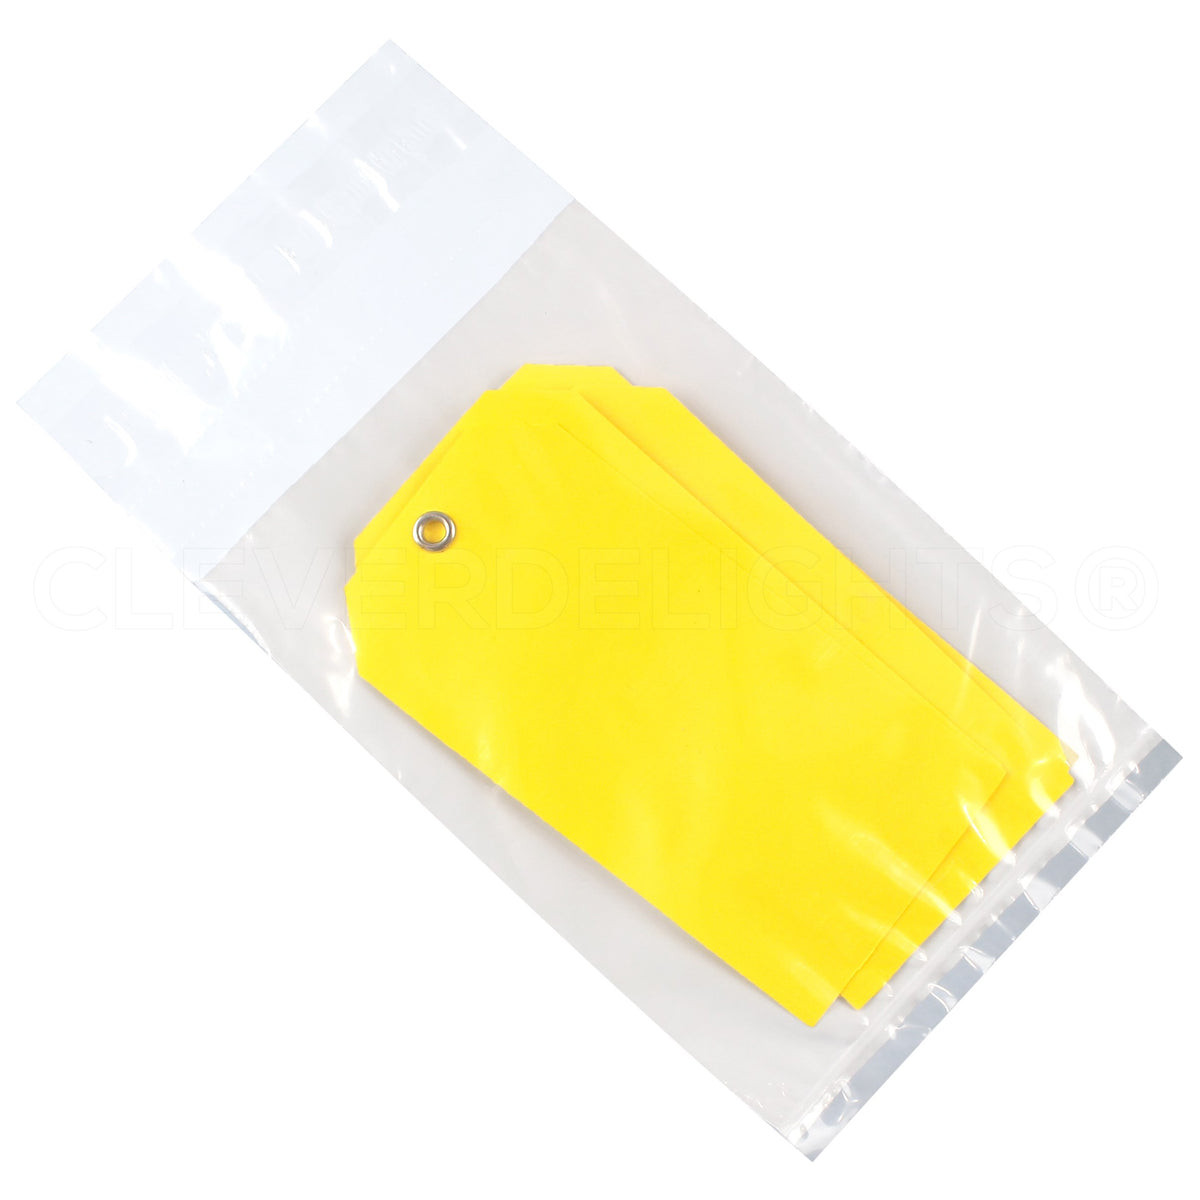 CleverDelights Yellow Foam Sheets - 8 x 12 - Adhesive Back